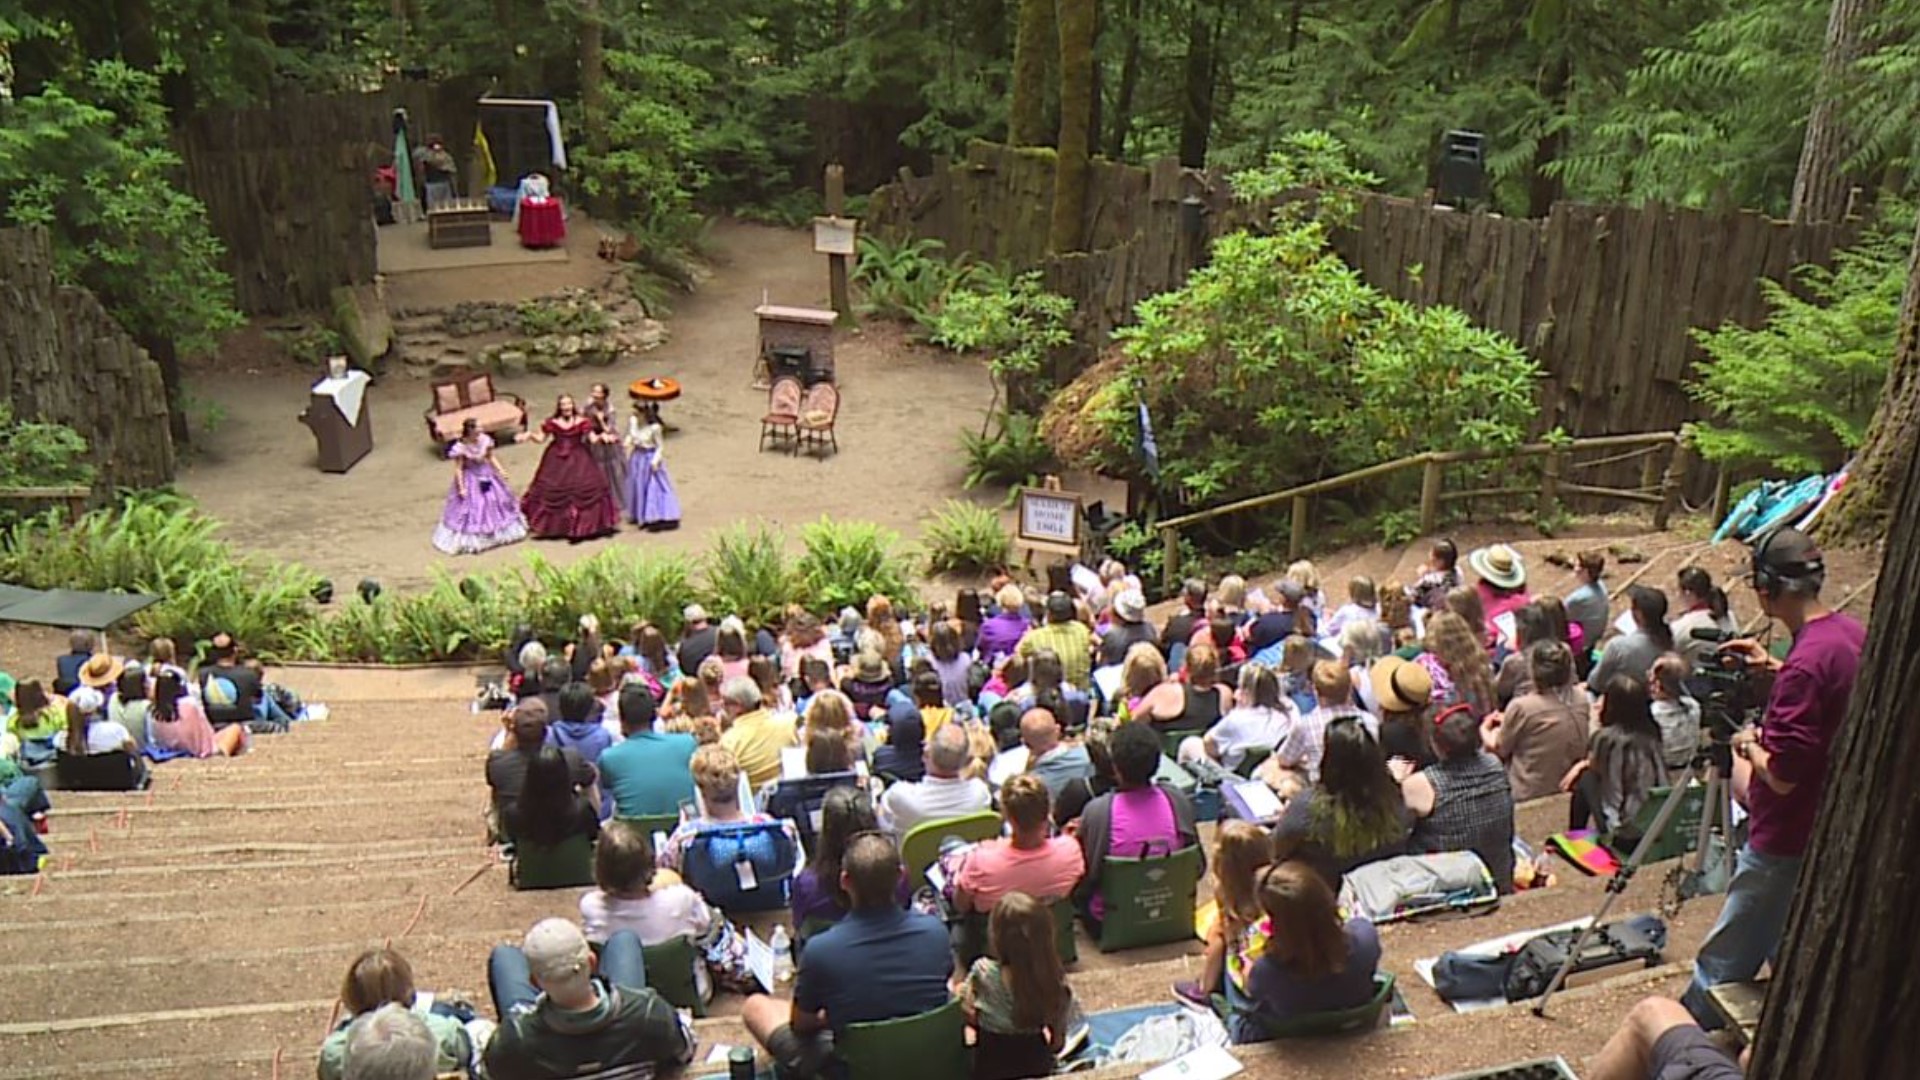 A short hike in the woods leads to a magical theater. #k5evening